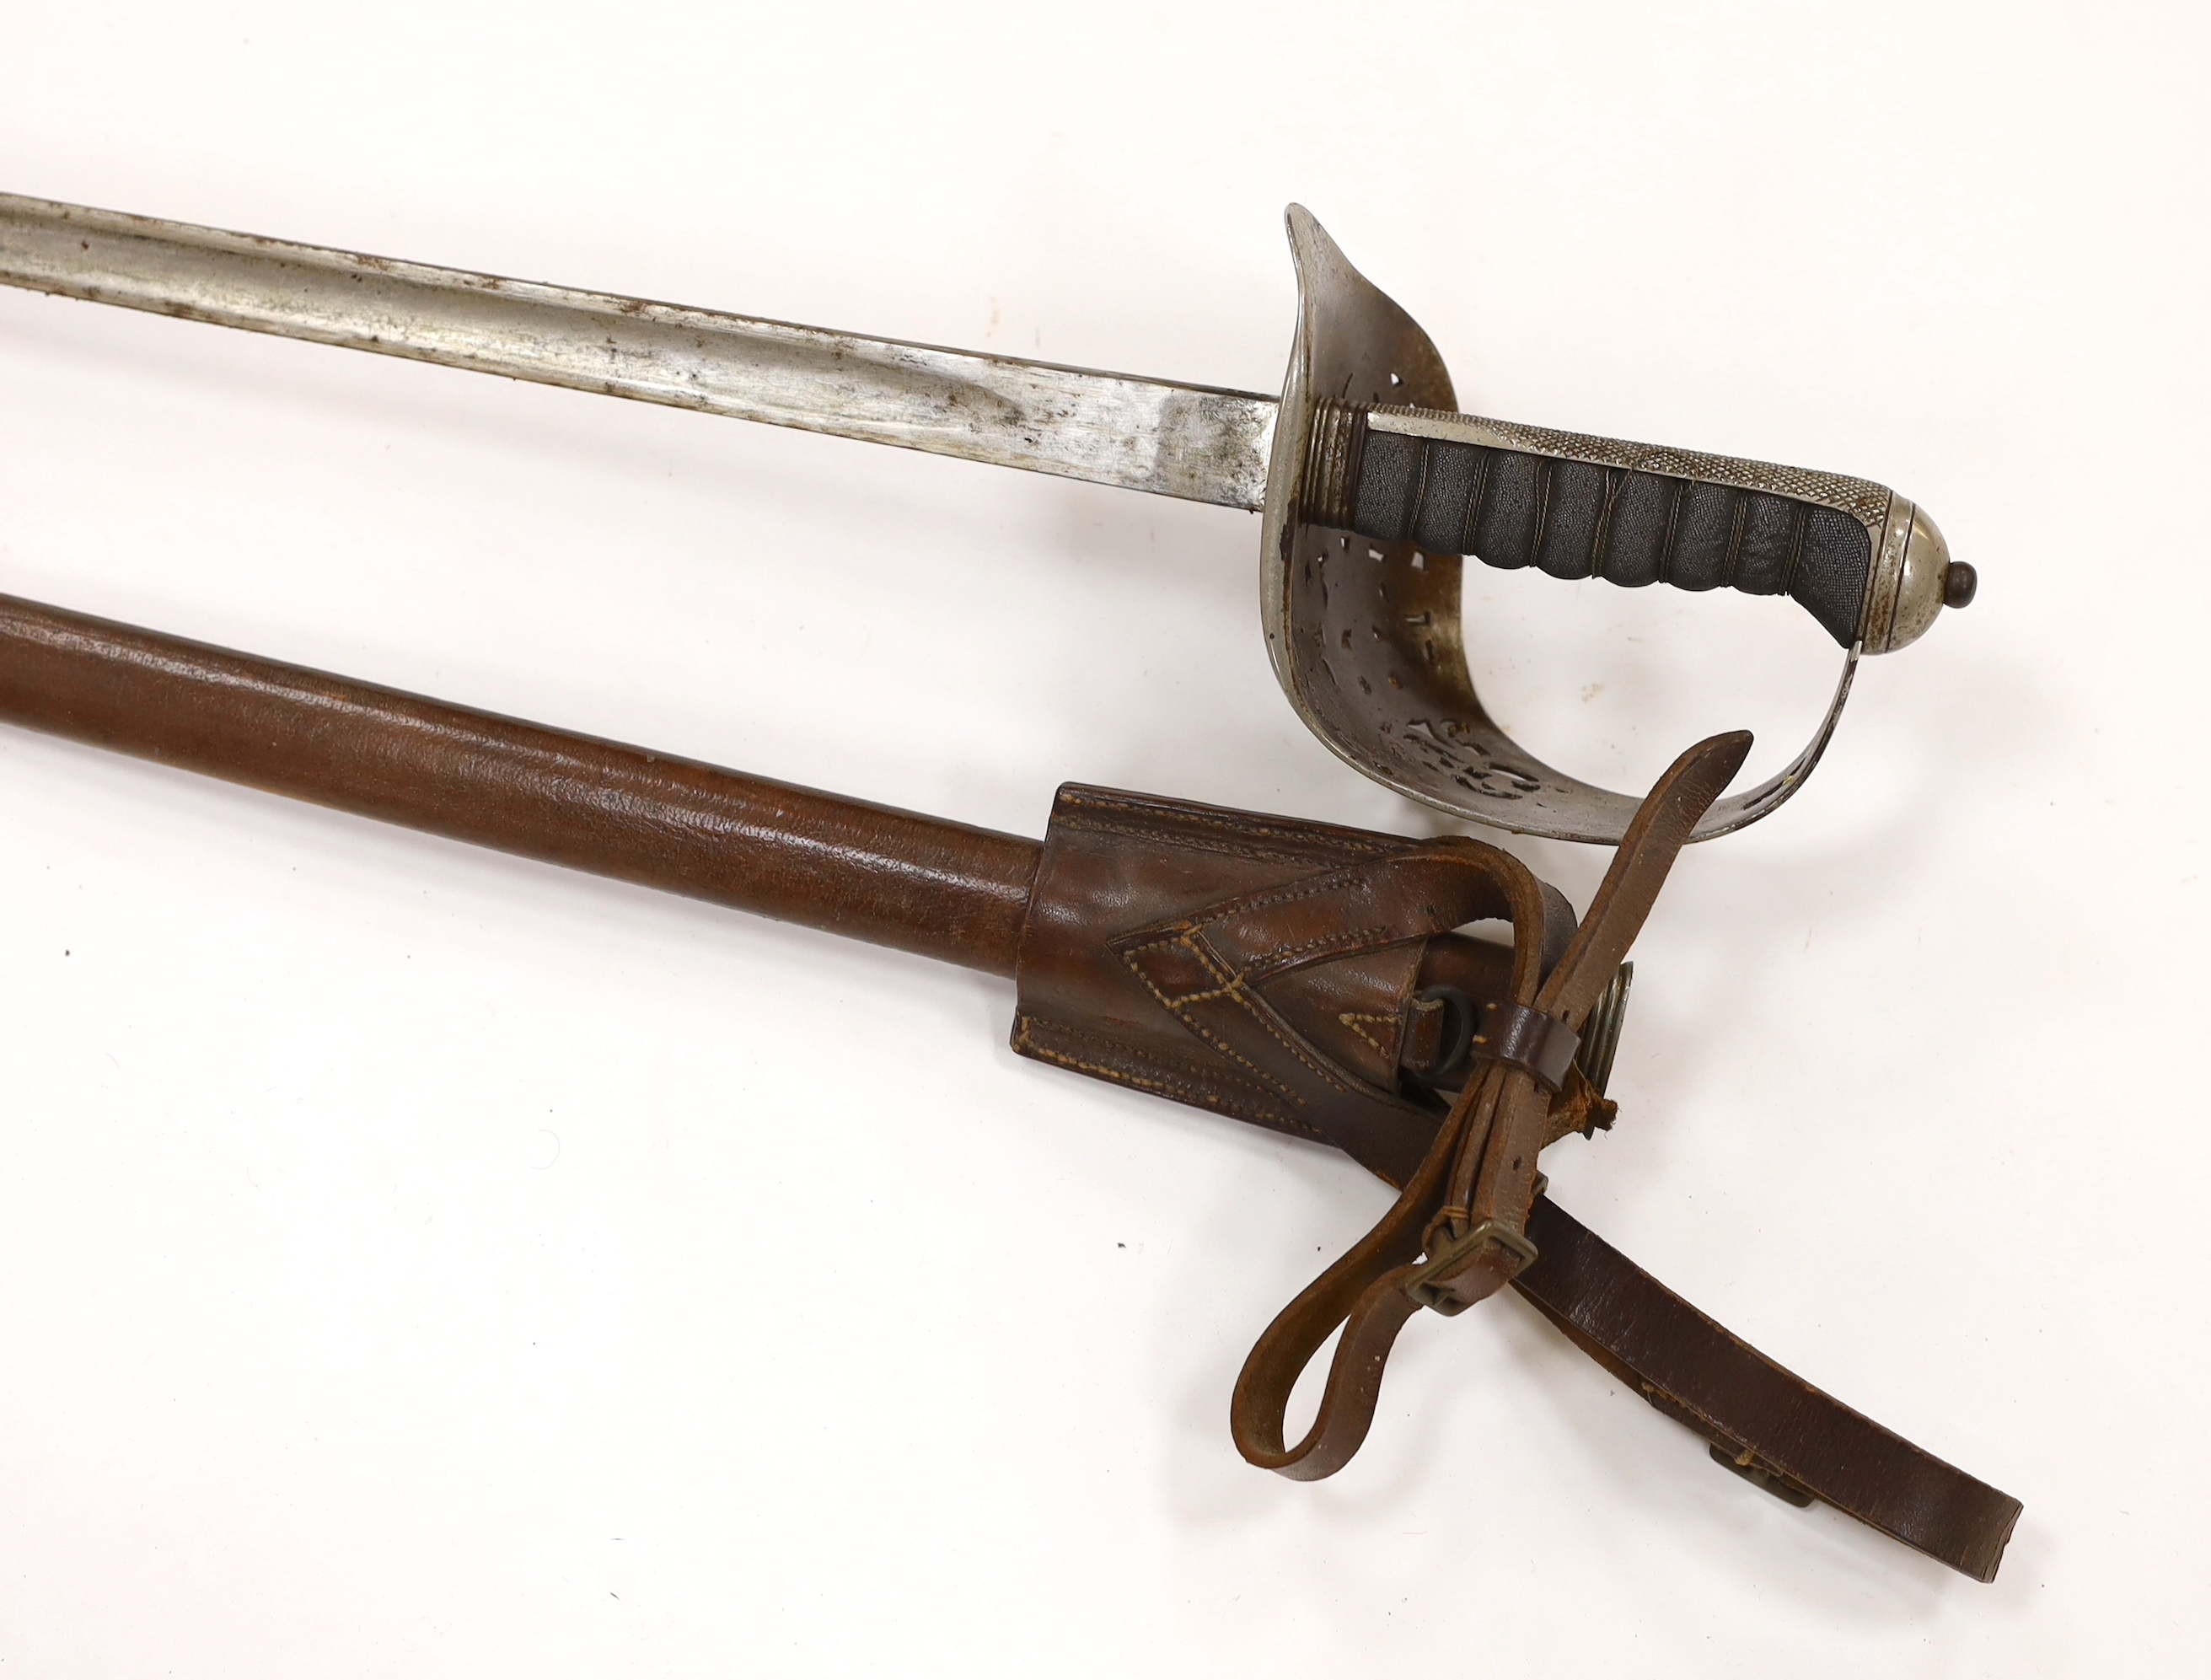 A George V 1897 pattern infantry officer's sword, with scabbard and leather hanger, blade 82cm - Image 5 of 7